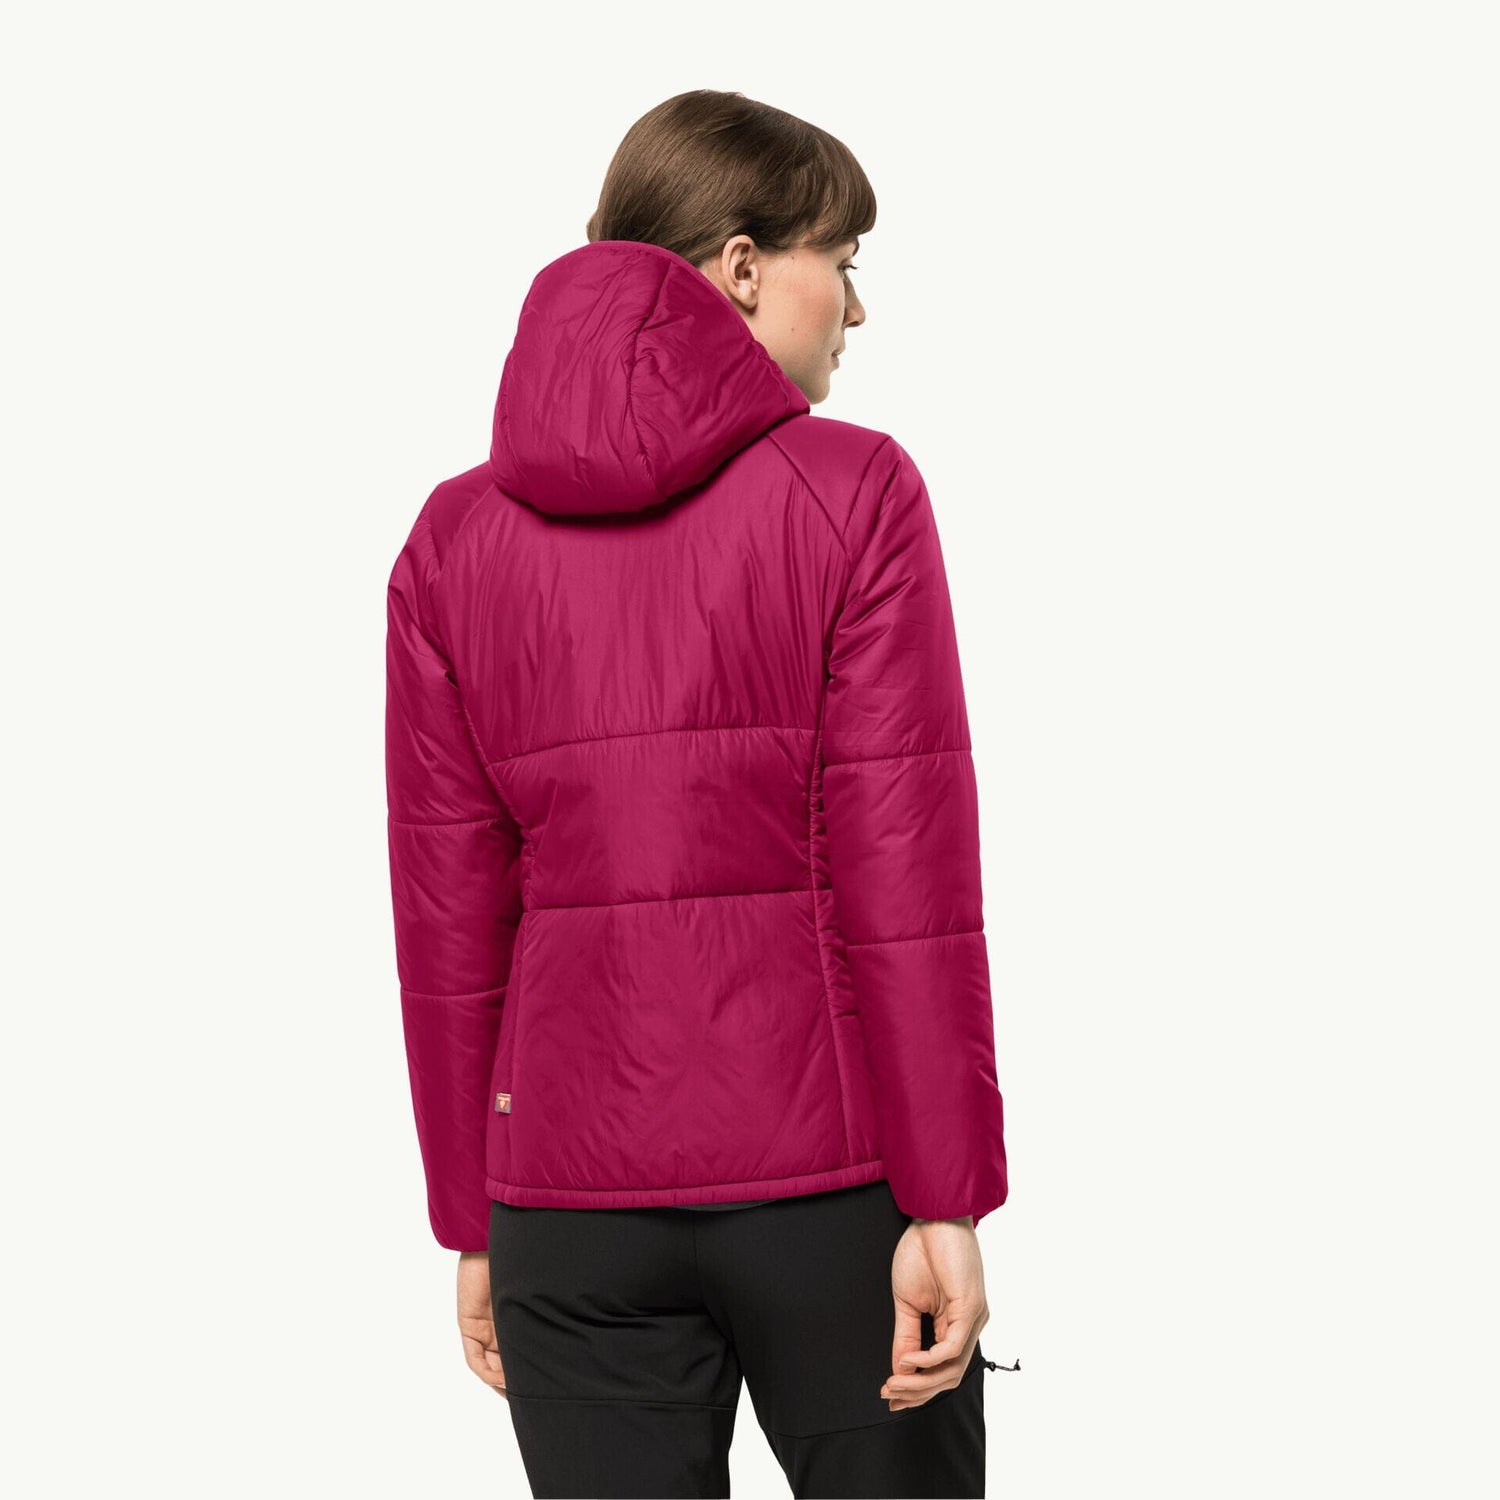 Jack Wolfskin W's Bergland Ins Hoody insulated jacket - Recycled materials Cranberry Jacket